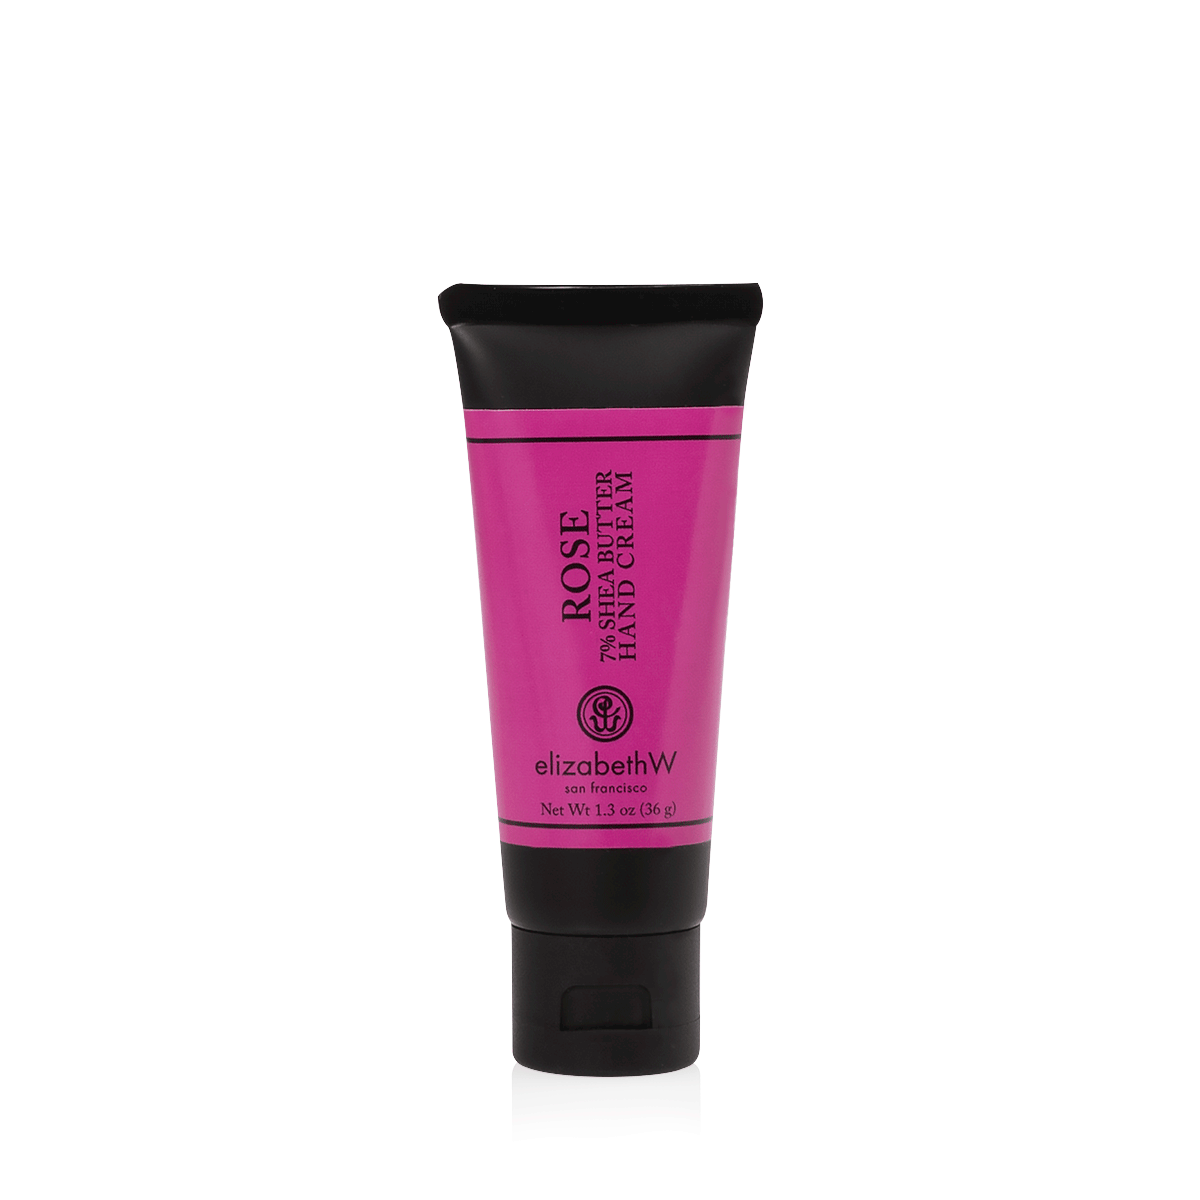 A pink tube of elizabeth W Signature Rose Hand Cream - Mini isolated on a white background. The tube is standing upright, and the cream is visibly advertised as weighing 1.